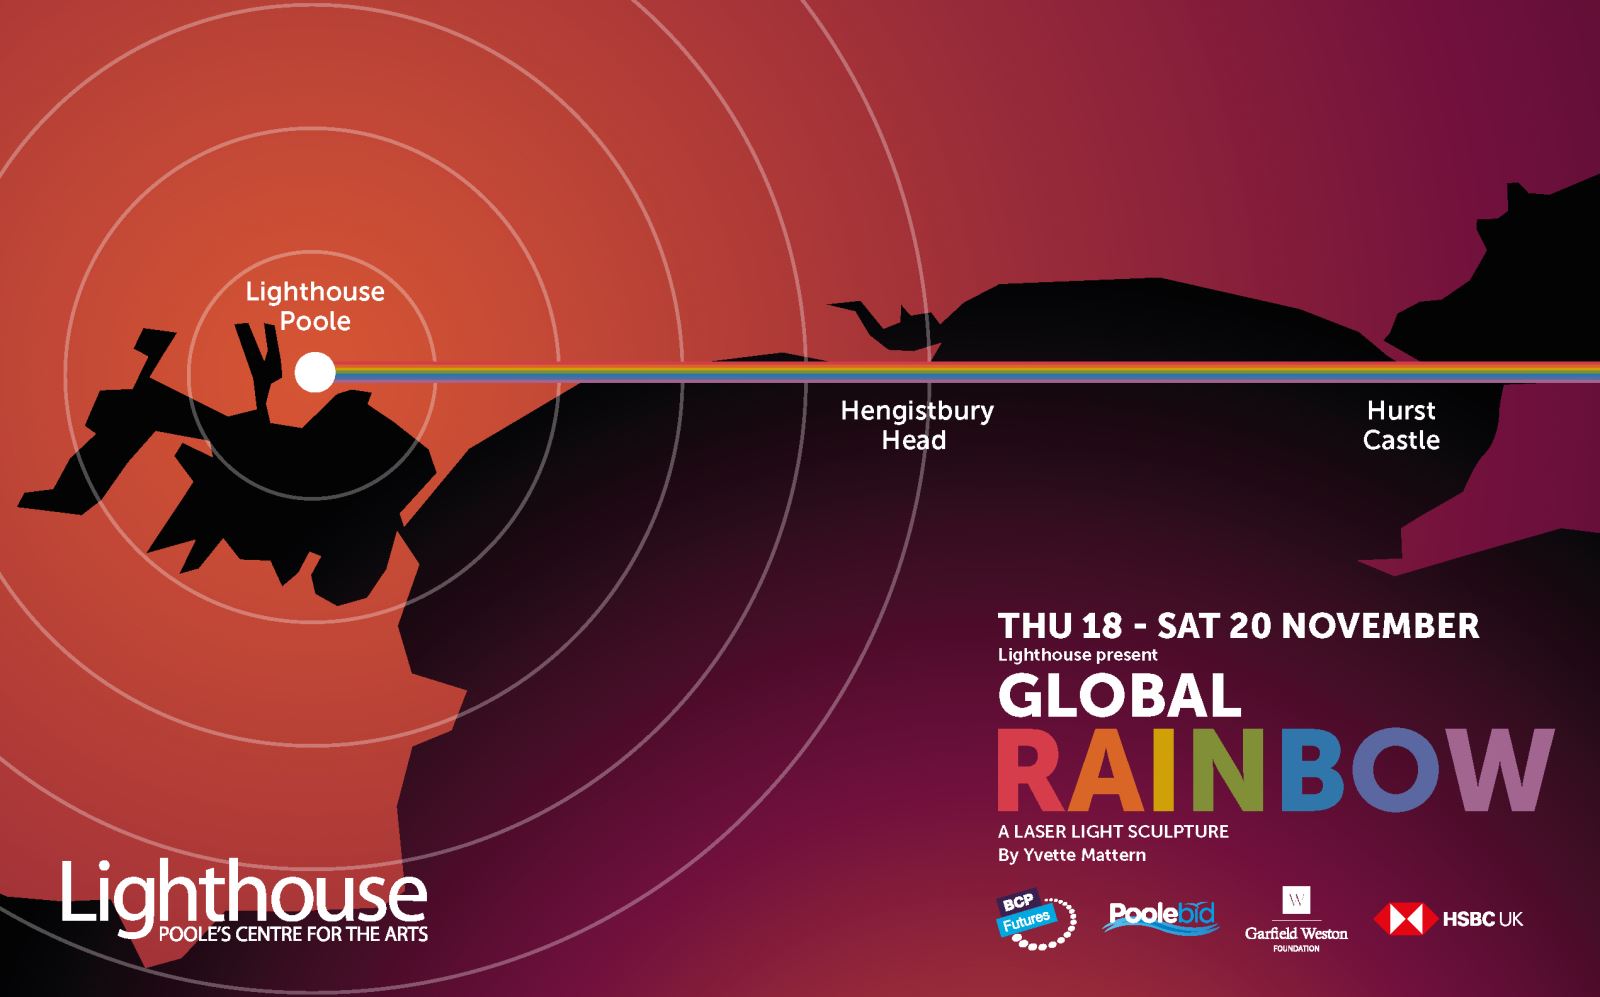 Lighthouse in Poole presents the global rainbow sculpture projected across Bournemouth, Christchurch and Poole 